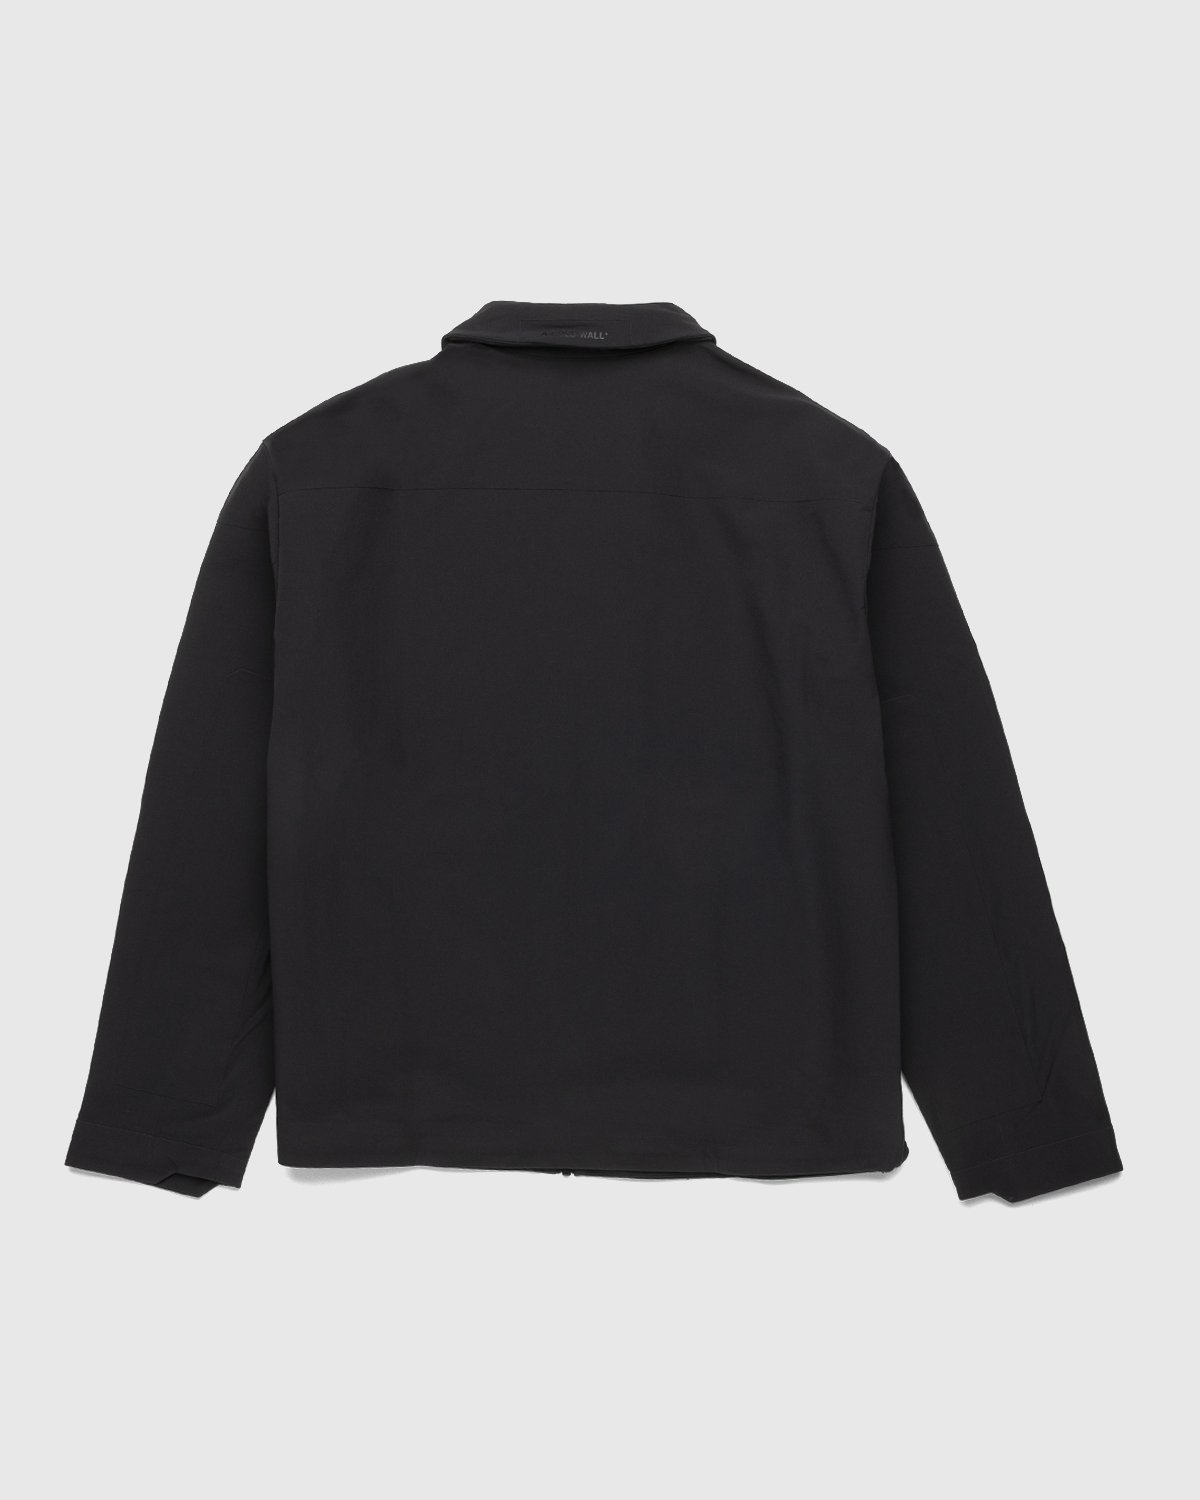 A-Cold-Wall* - Technical Overshirt Black - Clothing - Black - Image 2